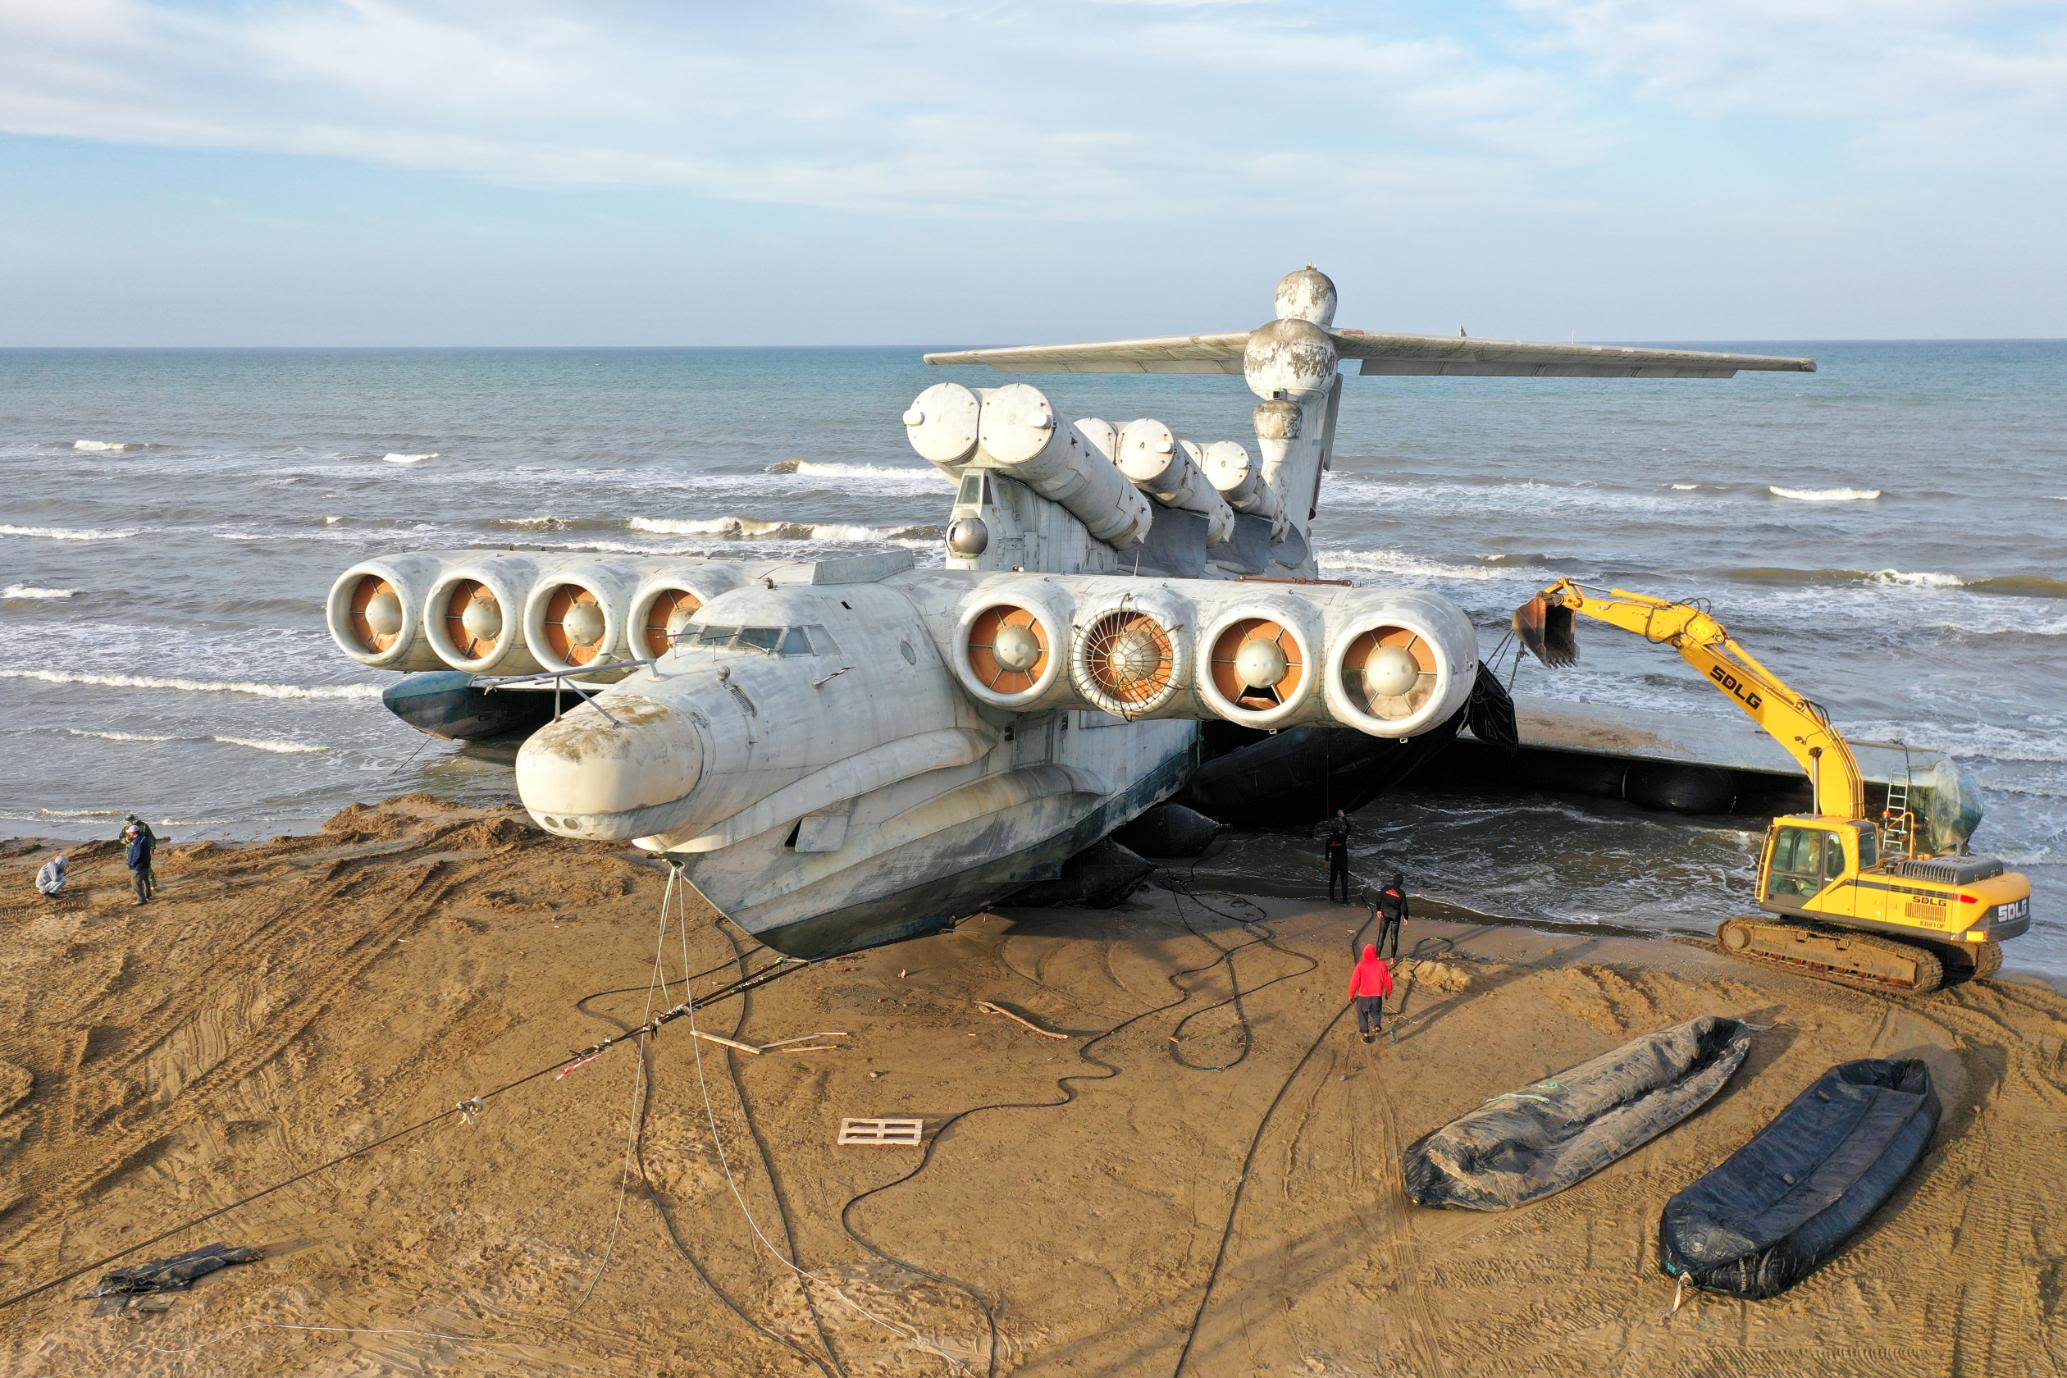 The 'Caspian Sea Monster' rises from the grave